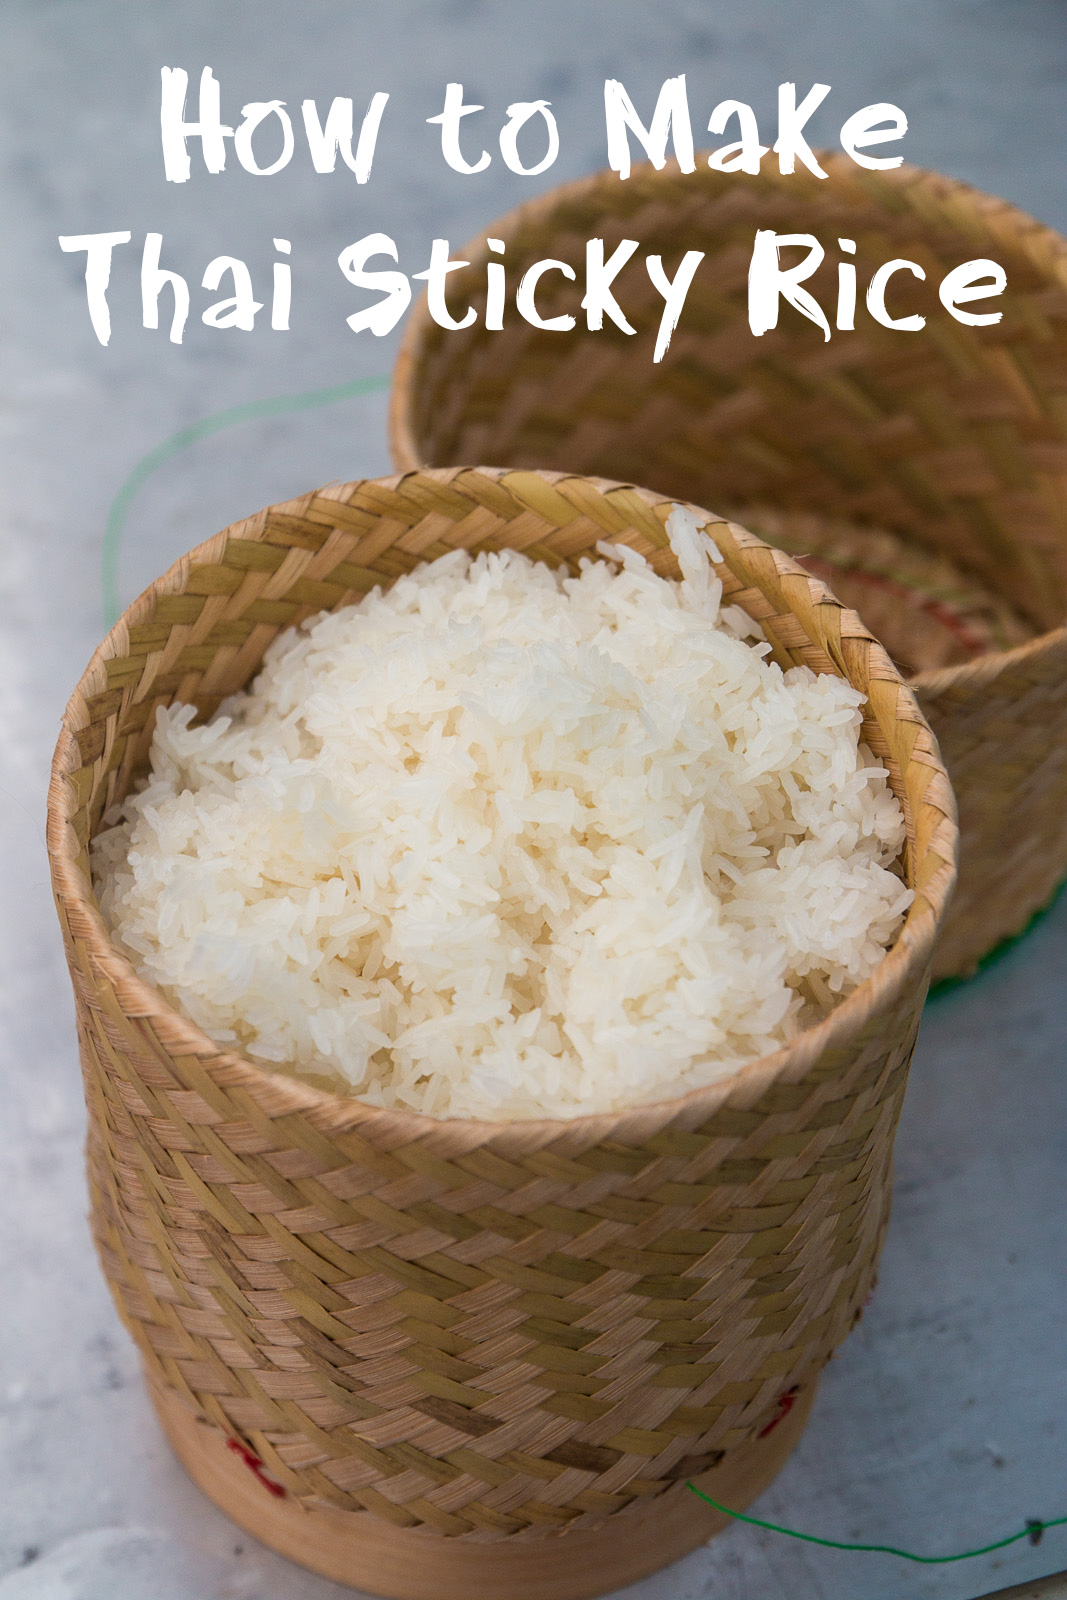 https://www.eatingthaifood.com/wp-content/uploads/2015/02/how_to_make_sticky_rice.jpg